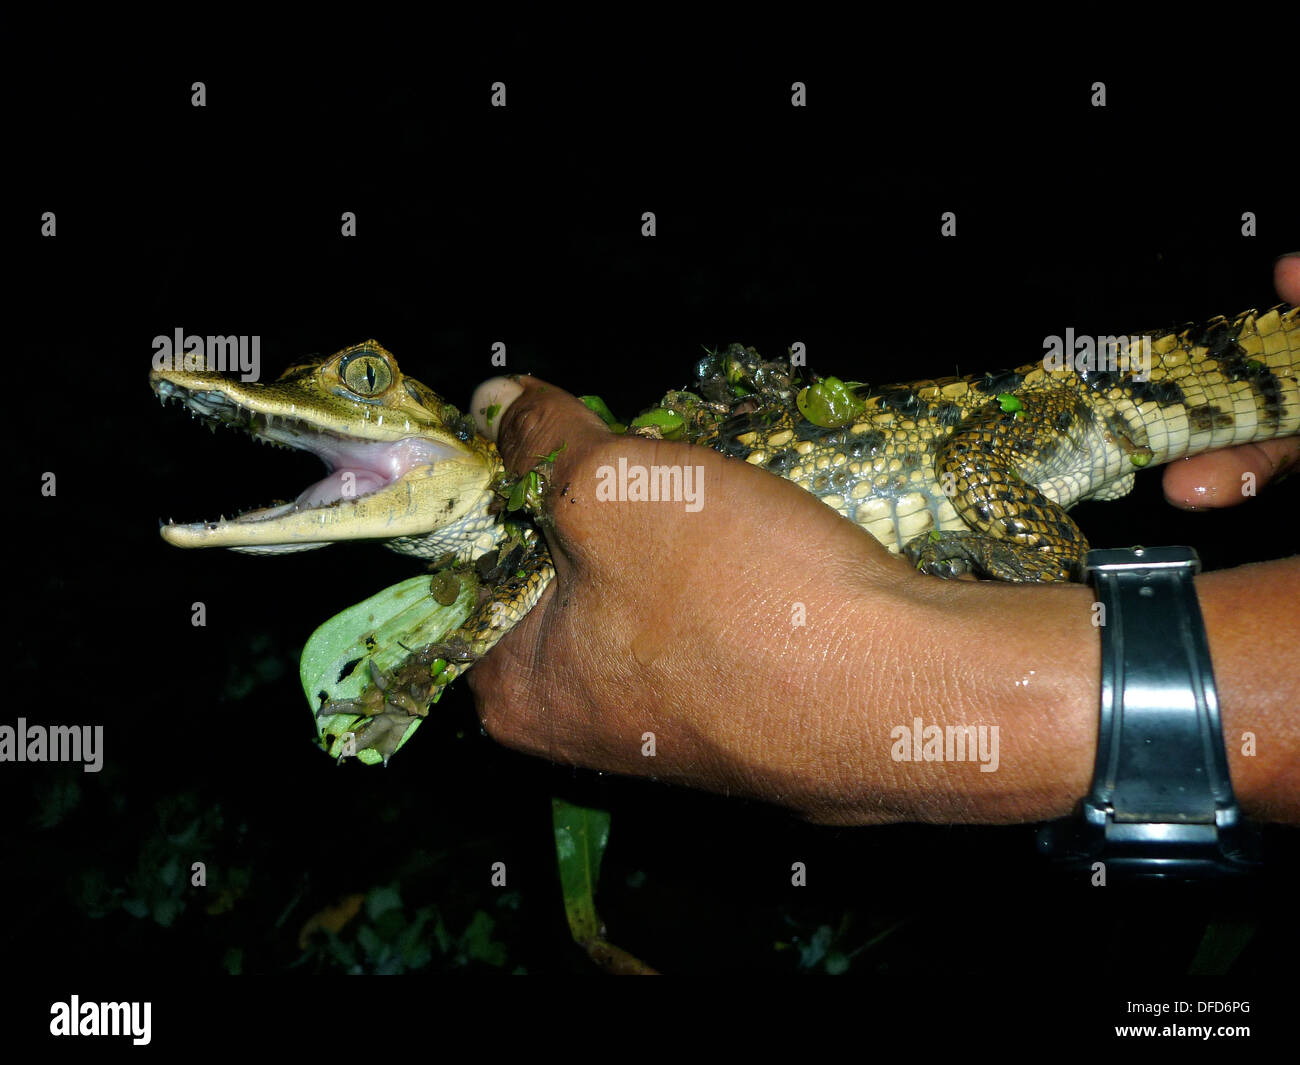 A Baby Caiman being held by a local guide in the Amazon rain forest during a night tour from a lodge near Iquitos, Peru. Stock Photo